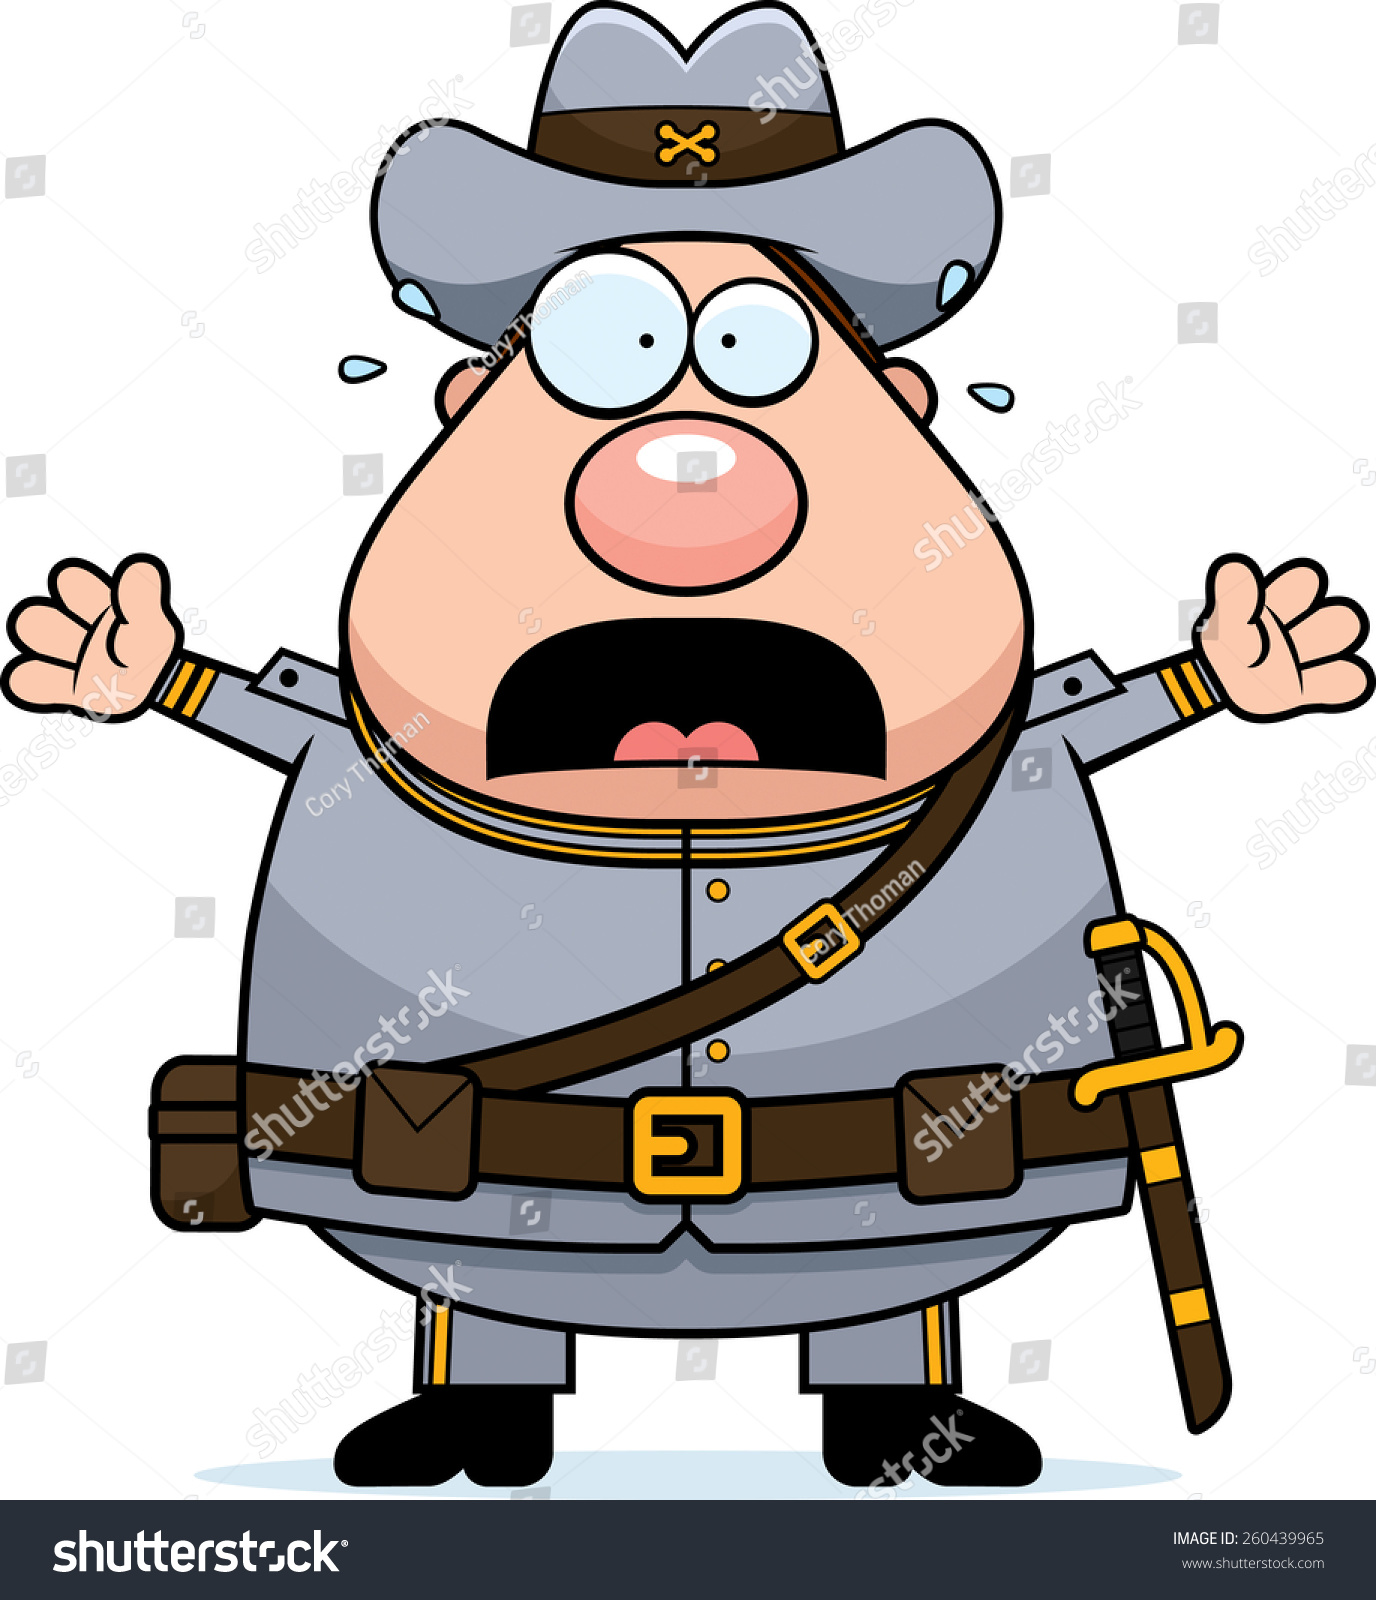 SVG of A cartoon illustration of a Civil War Confederate soldier looking scared. svg